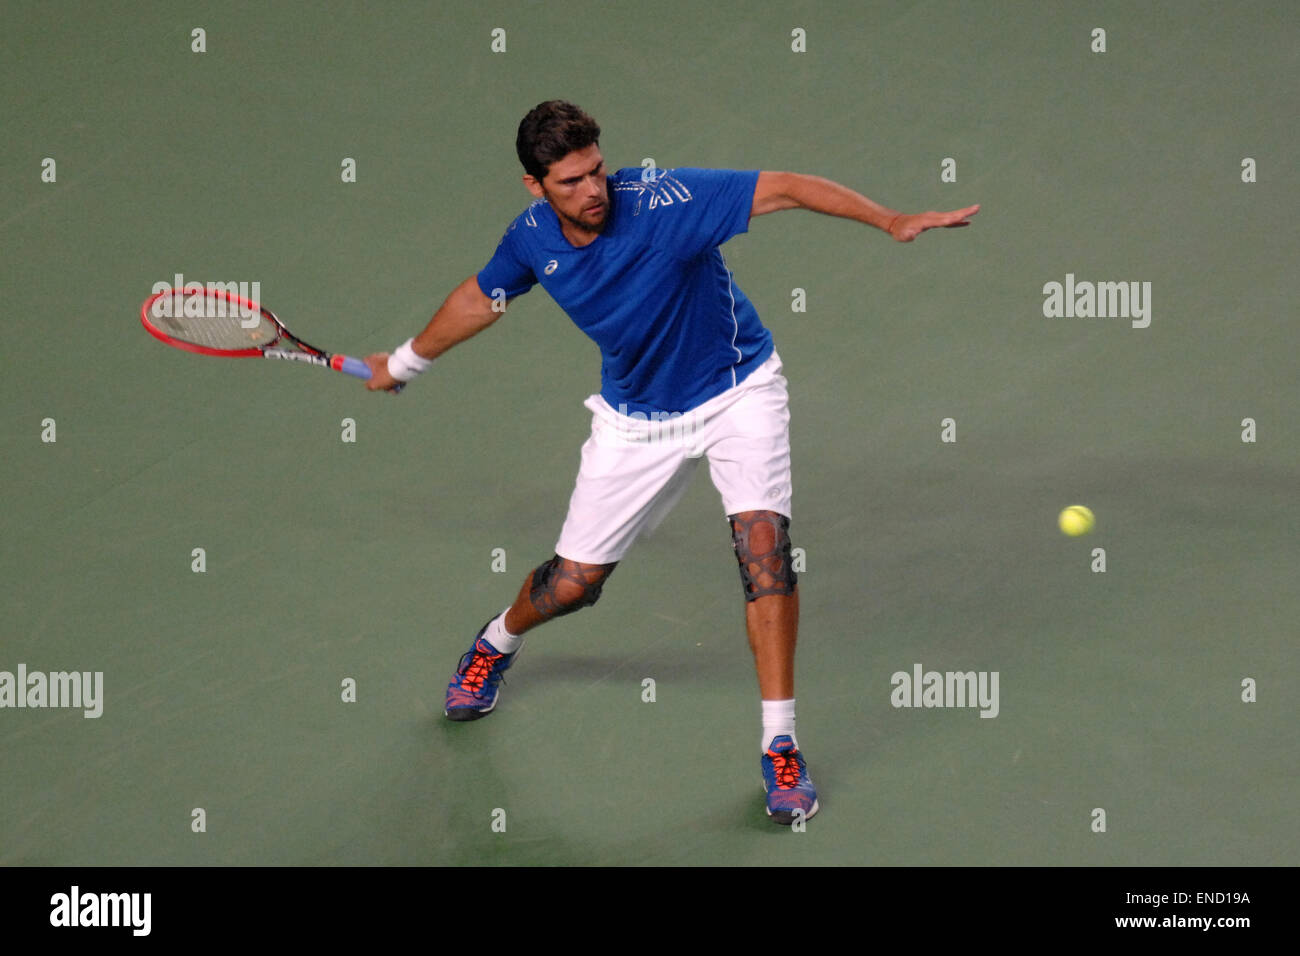 Vancouver, Canada. 2nd May, 2015. Mark Philippoussis of Australia returns a hit against Michael Chang of the United States during the PowerShares Champions showdown tennis tournament in Vancouver, Canada, May 2, 2015. It is the first ever PowerShares Series tennis circuit event held in Canada. Credit:  Sergei Bachlakov/Xinhua/Alamy Live News Stock Photo